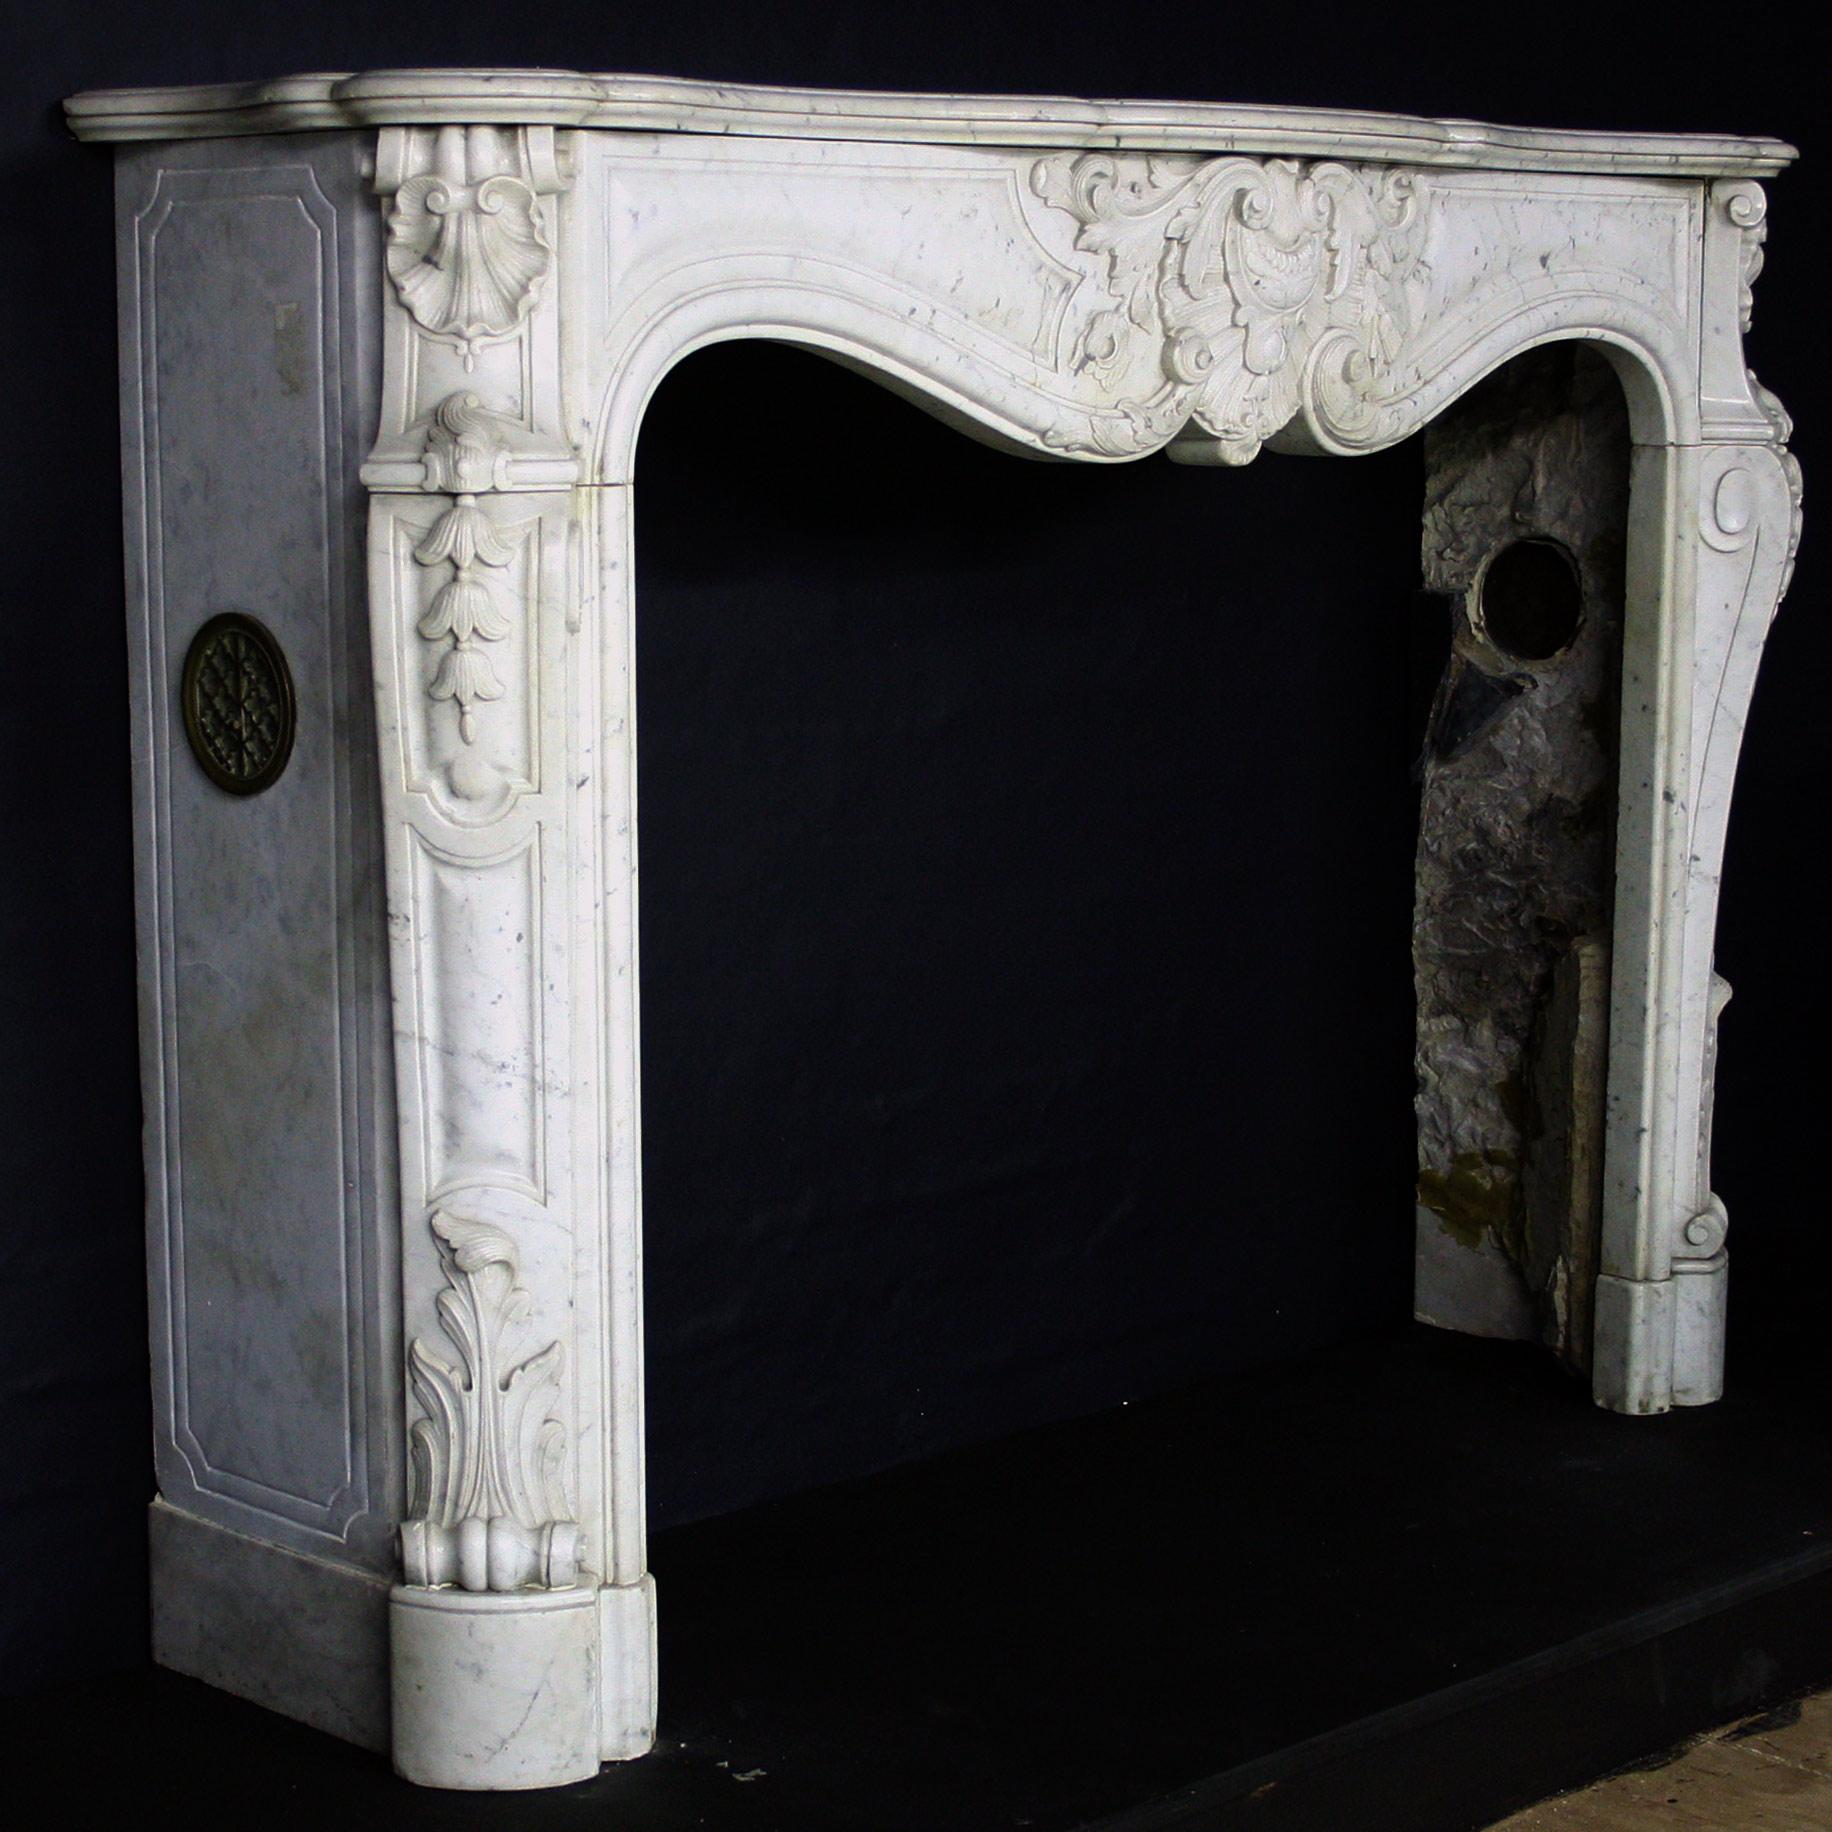 An elegant Sicilian marble Chimneypiece in the Louis XV style. Below an arc-en-arbolette shelf, the serpentine frieze has an elaborate shell cartouche with scrolling acanthus between raised and fielded panels. The Jambs comprise bold shell corner